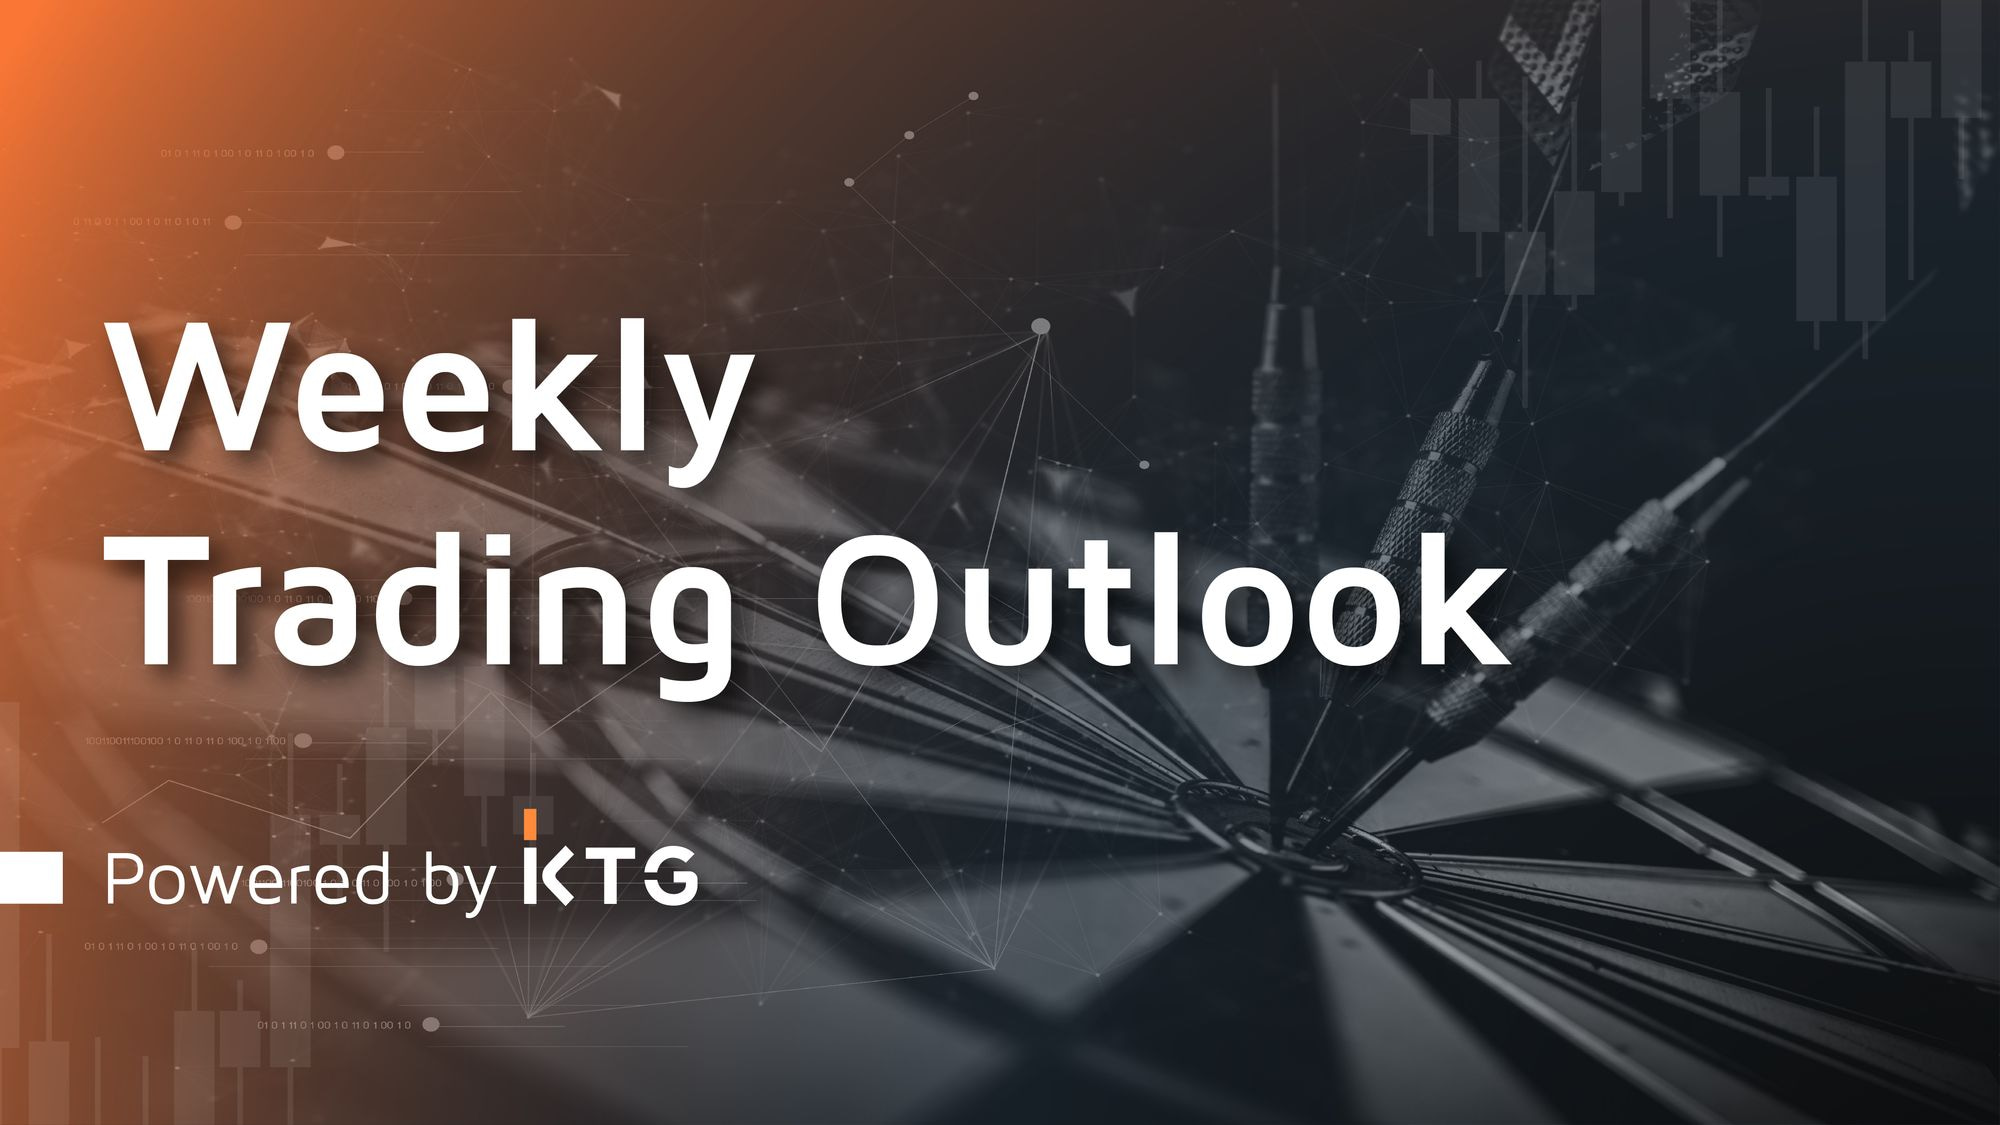 Will we see more accelerated up-moves? - #TradingOutlook Powered by KTG